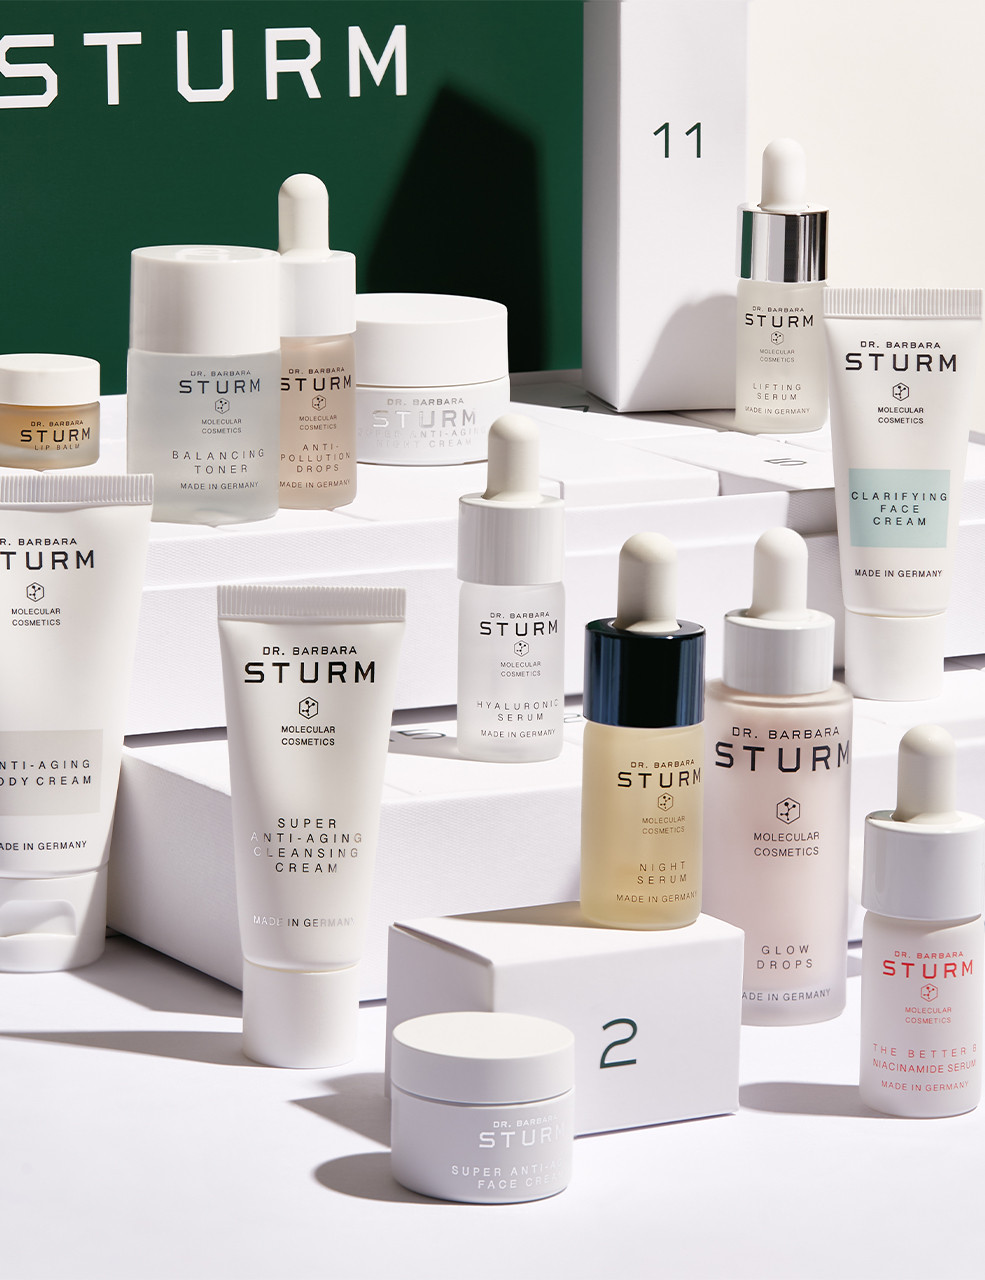 The ADVENT CALENDAR features a selection of Dr. Sturm’s most loved products